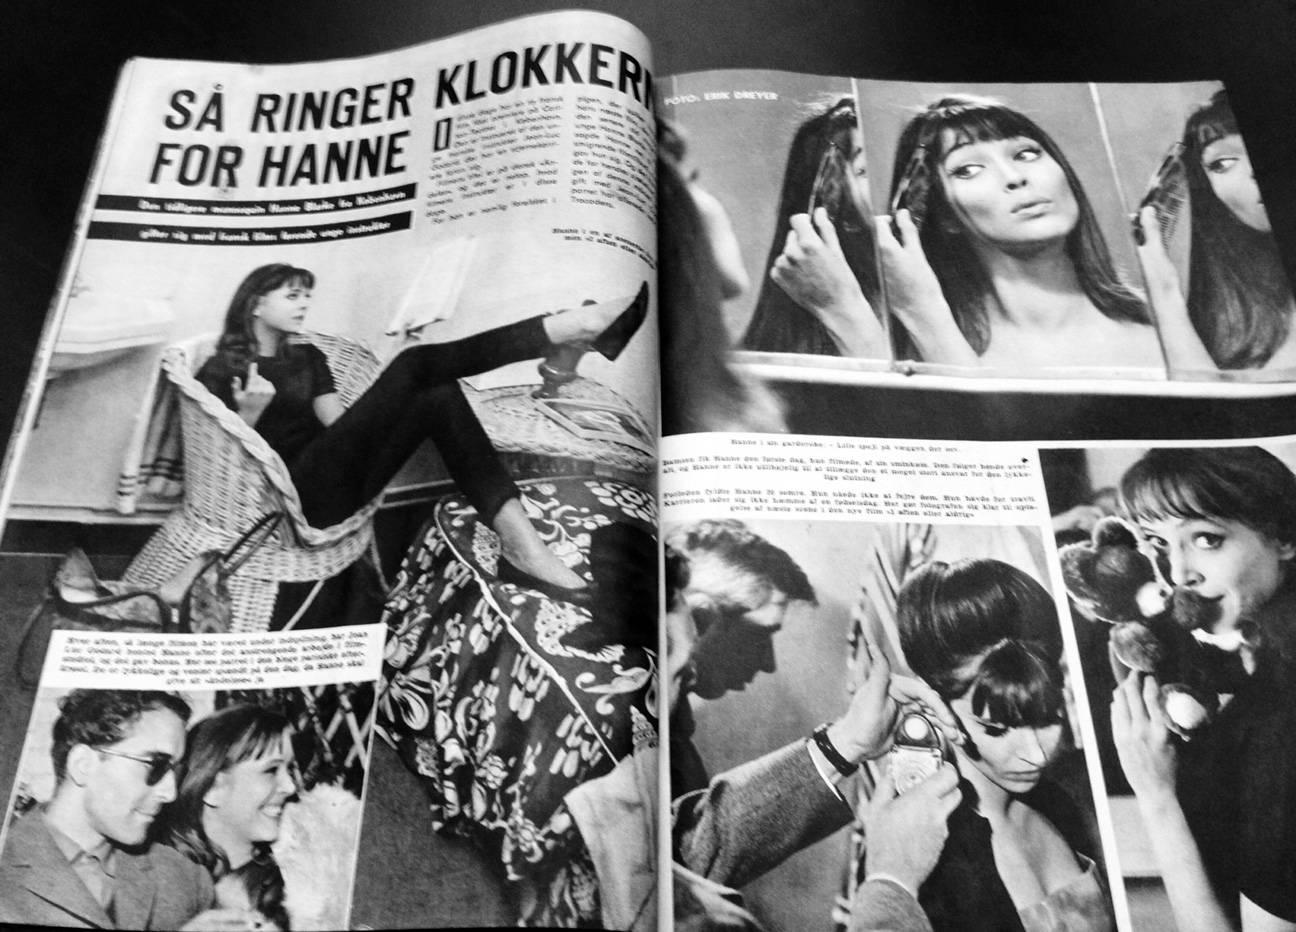 Jean-Luc Godard
Vintage original 1960 Se Og Hør magazine featuring a fantastic Jean Luc Godard/Anna Karina cover that would look very cool framed.

Full magazine. 8 x 10 inches. Staple bound. Approximately 40 pages.
Some minor staining to front